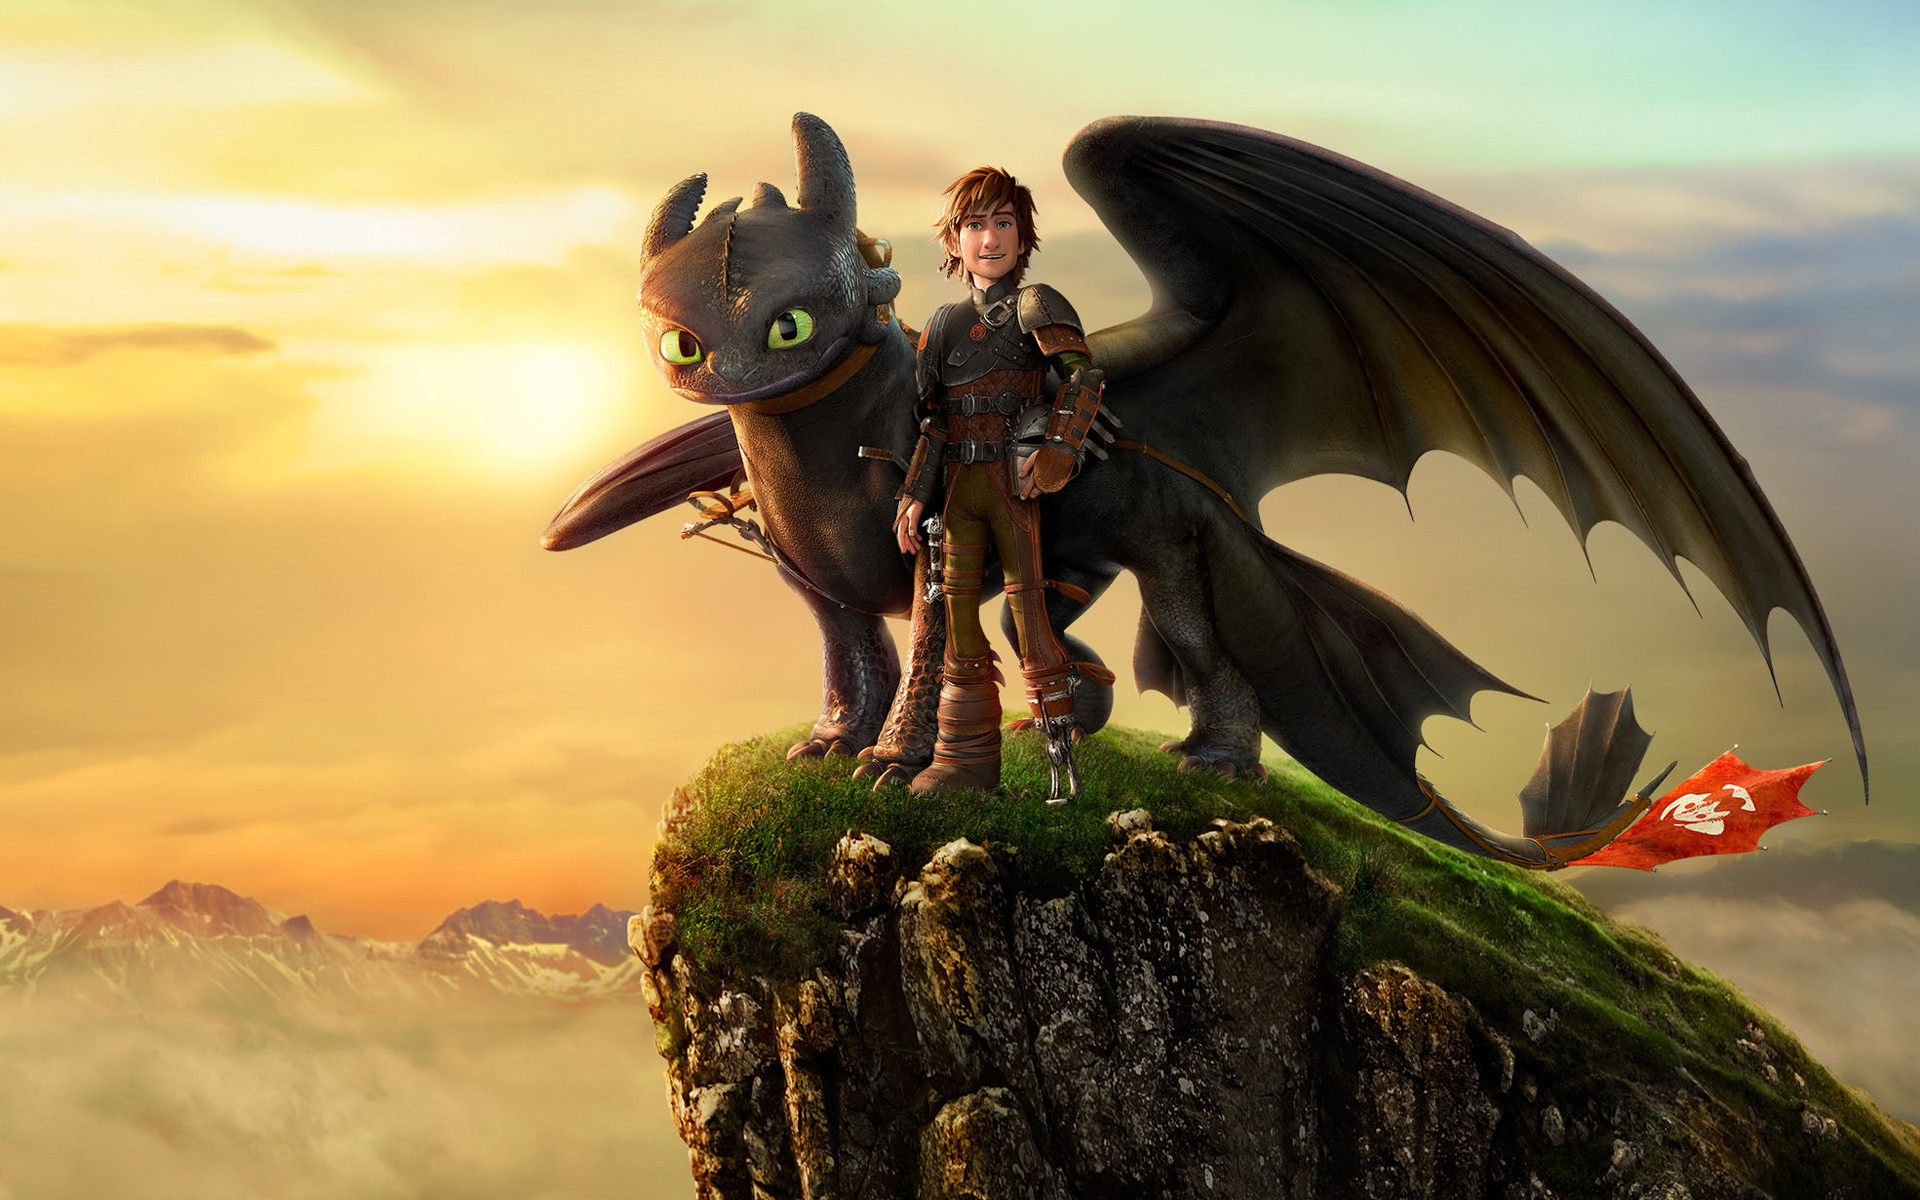 How To Train Your Dragon 2 Toothless Toy 1920x1200